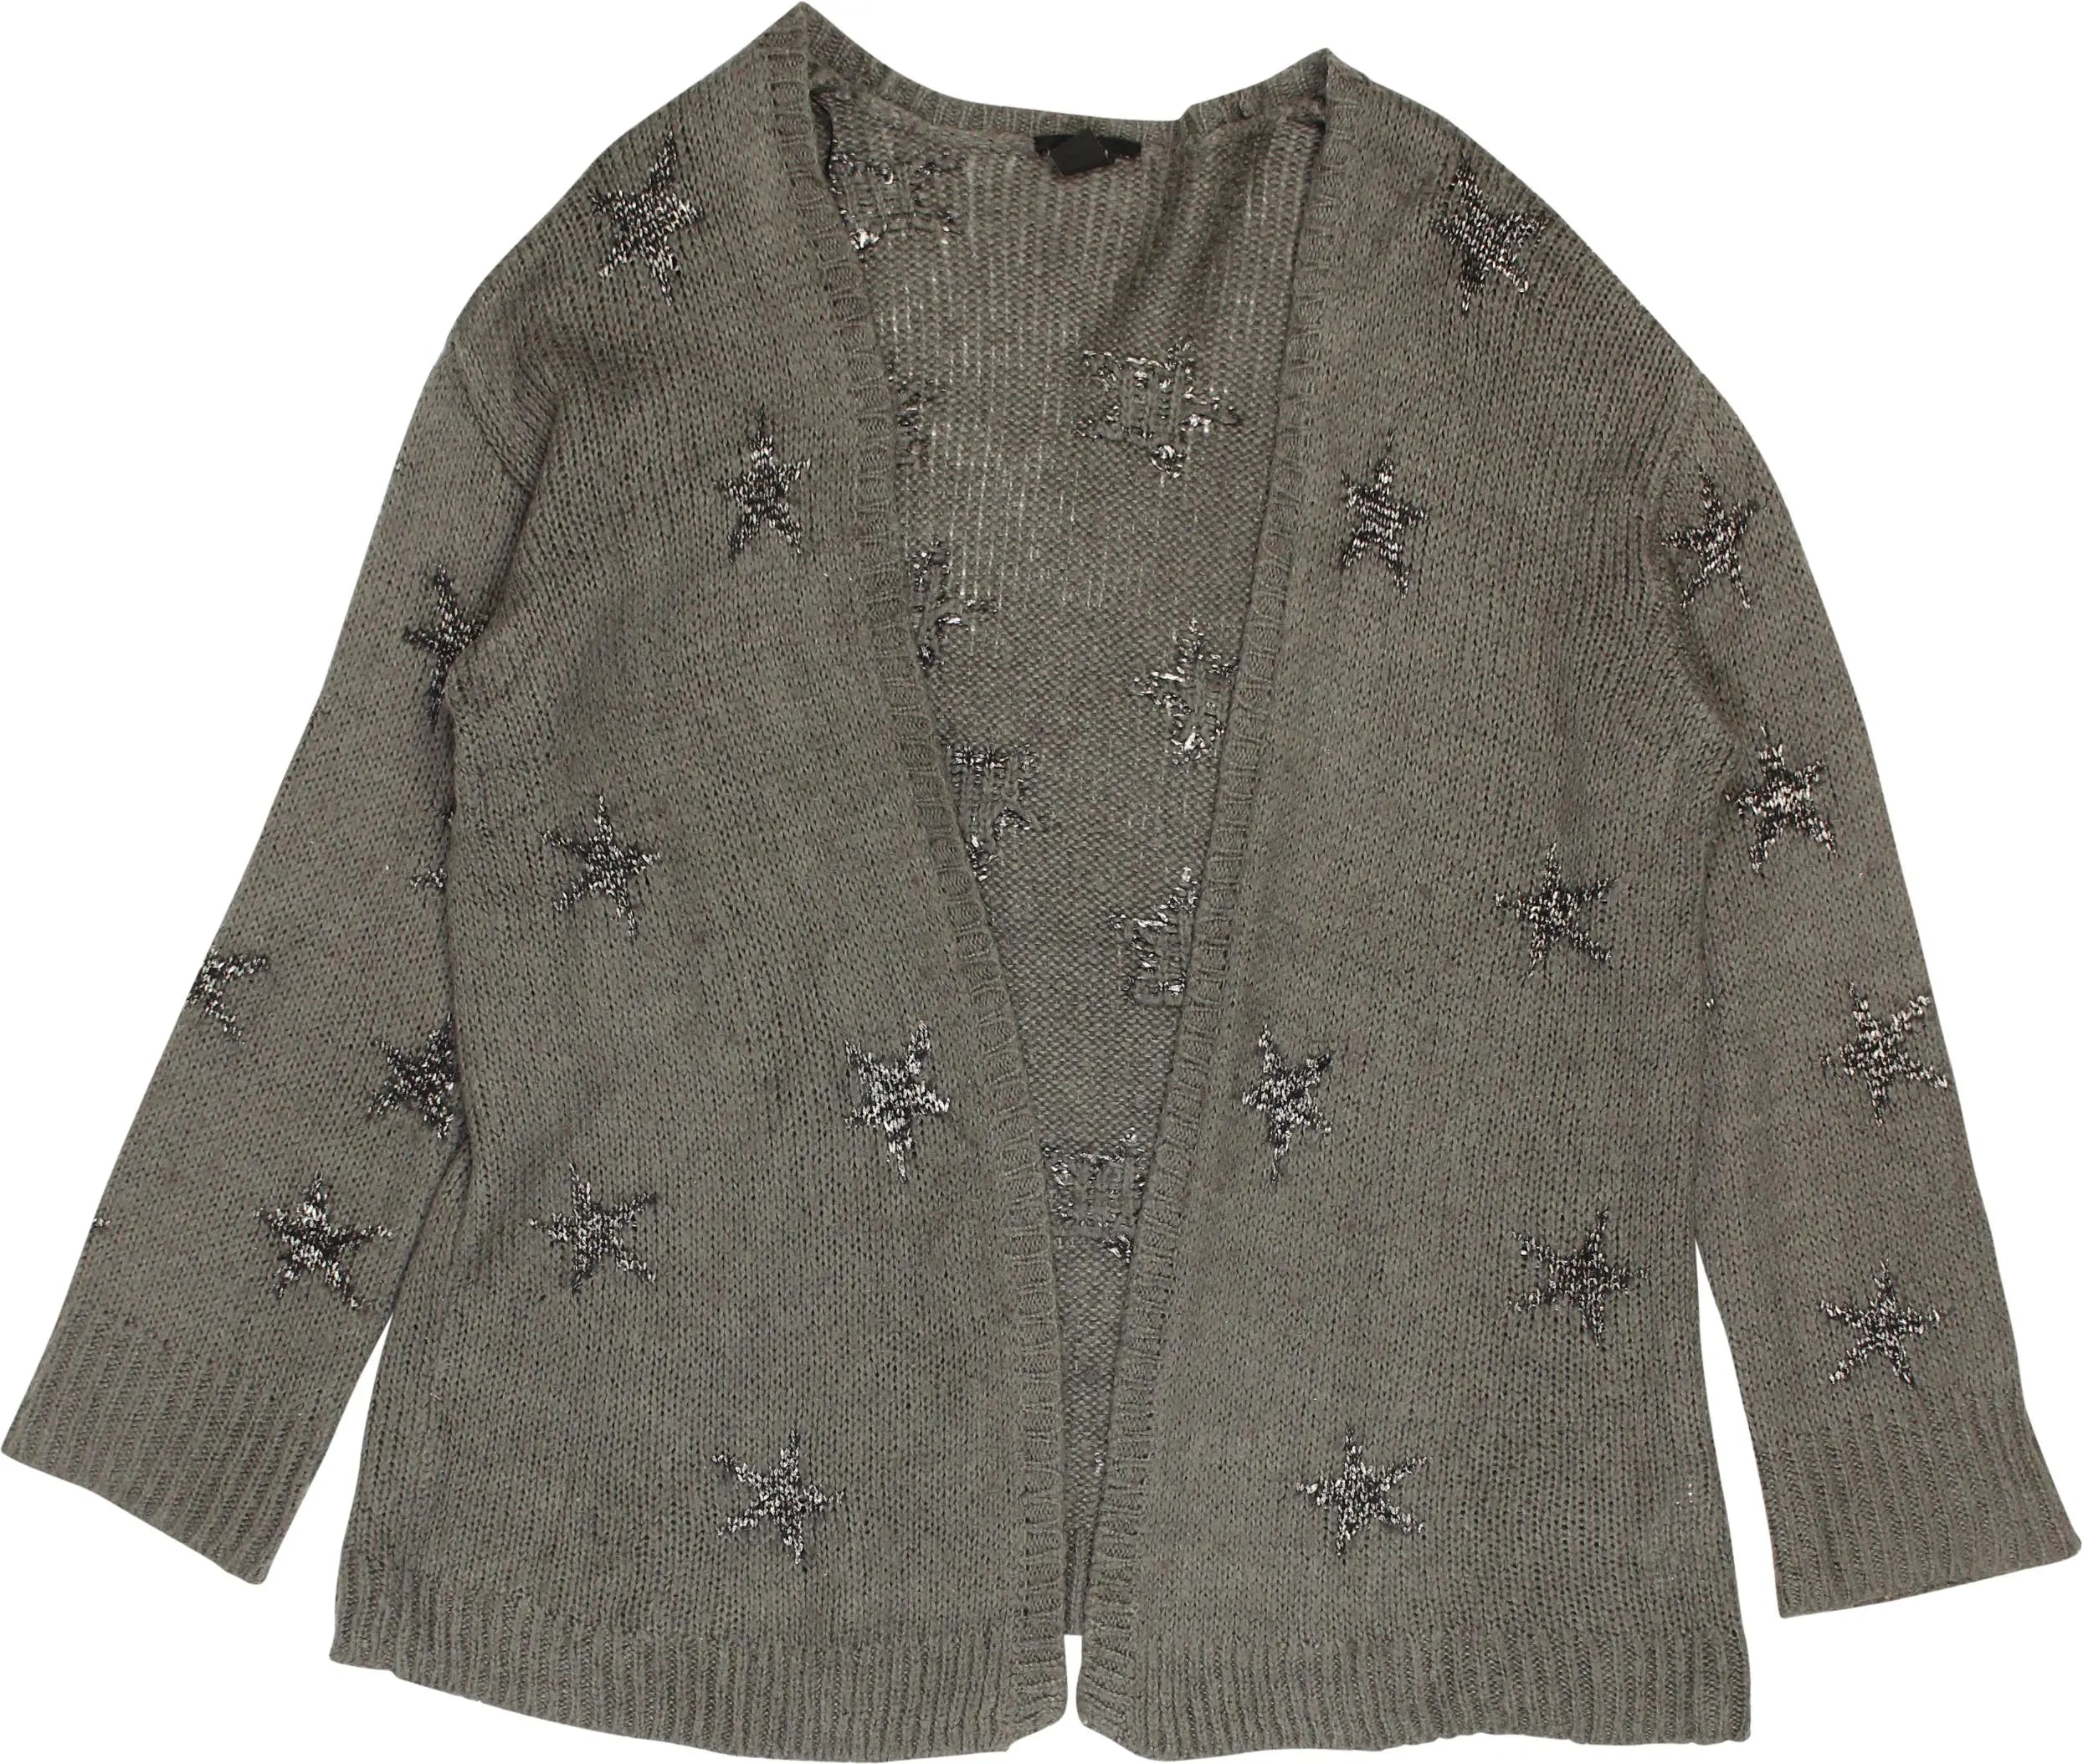 H&M - Stars Cardigan- ThriftTale.com - Vintage and second handclothing